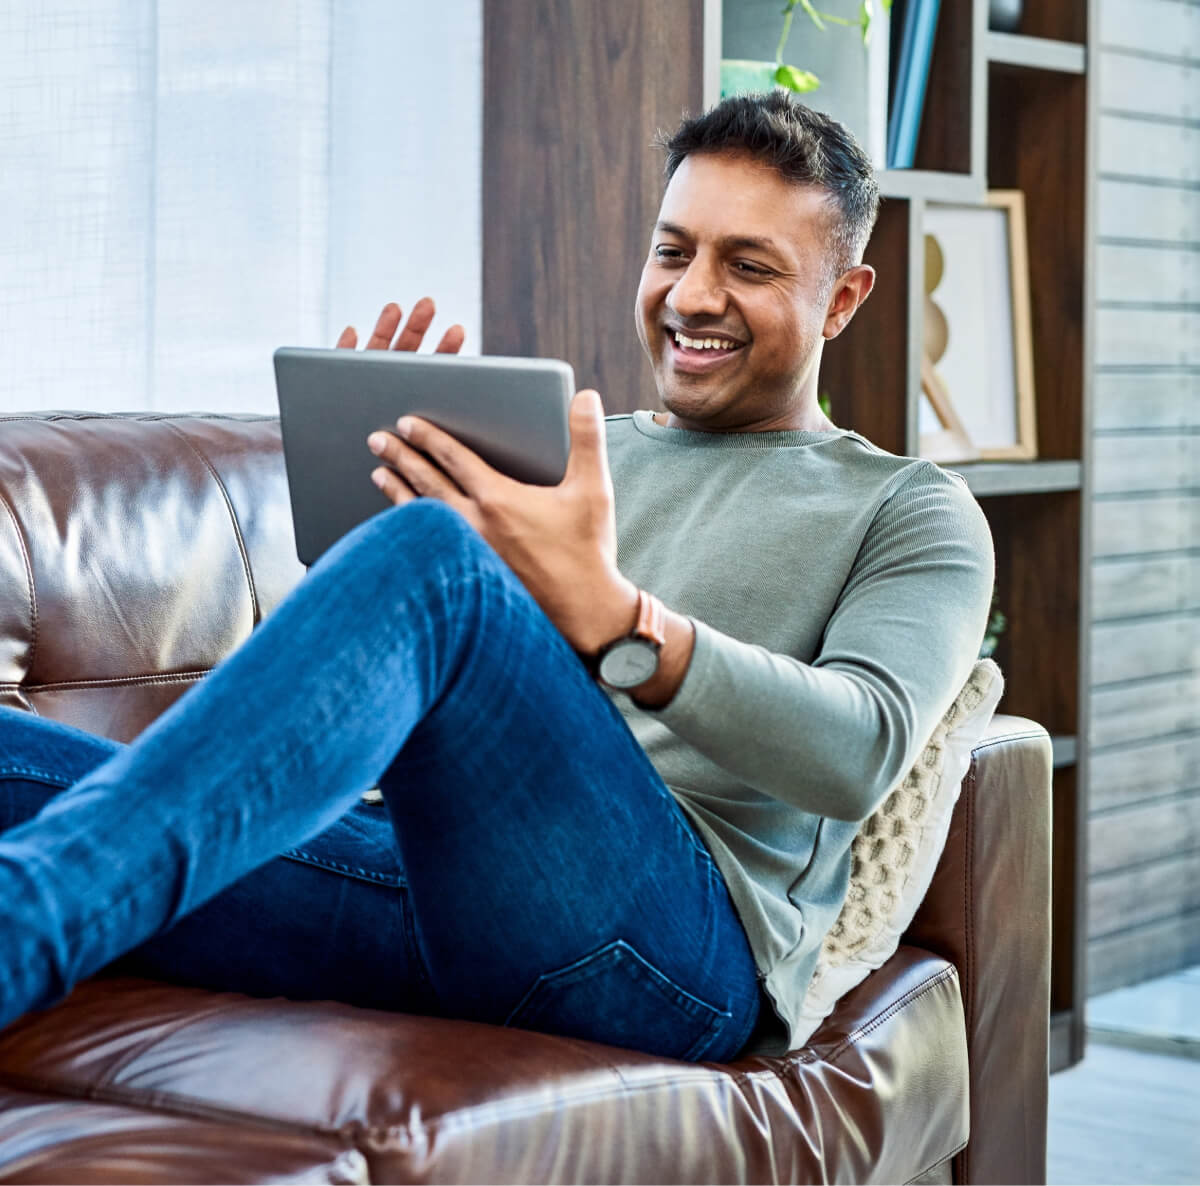 Man lounging on a couch while scrolling on tablet